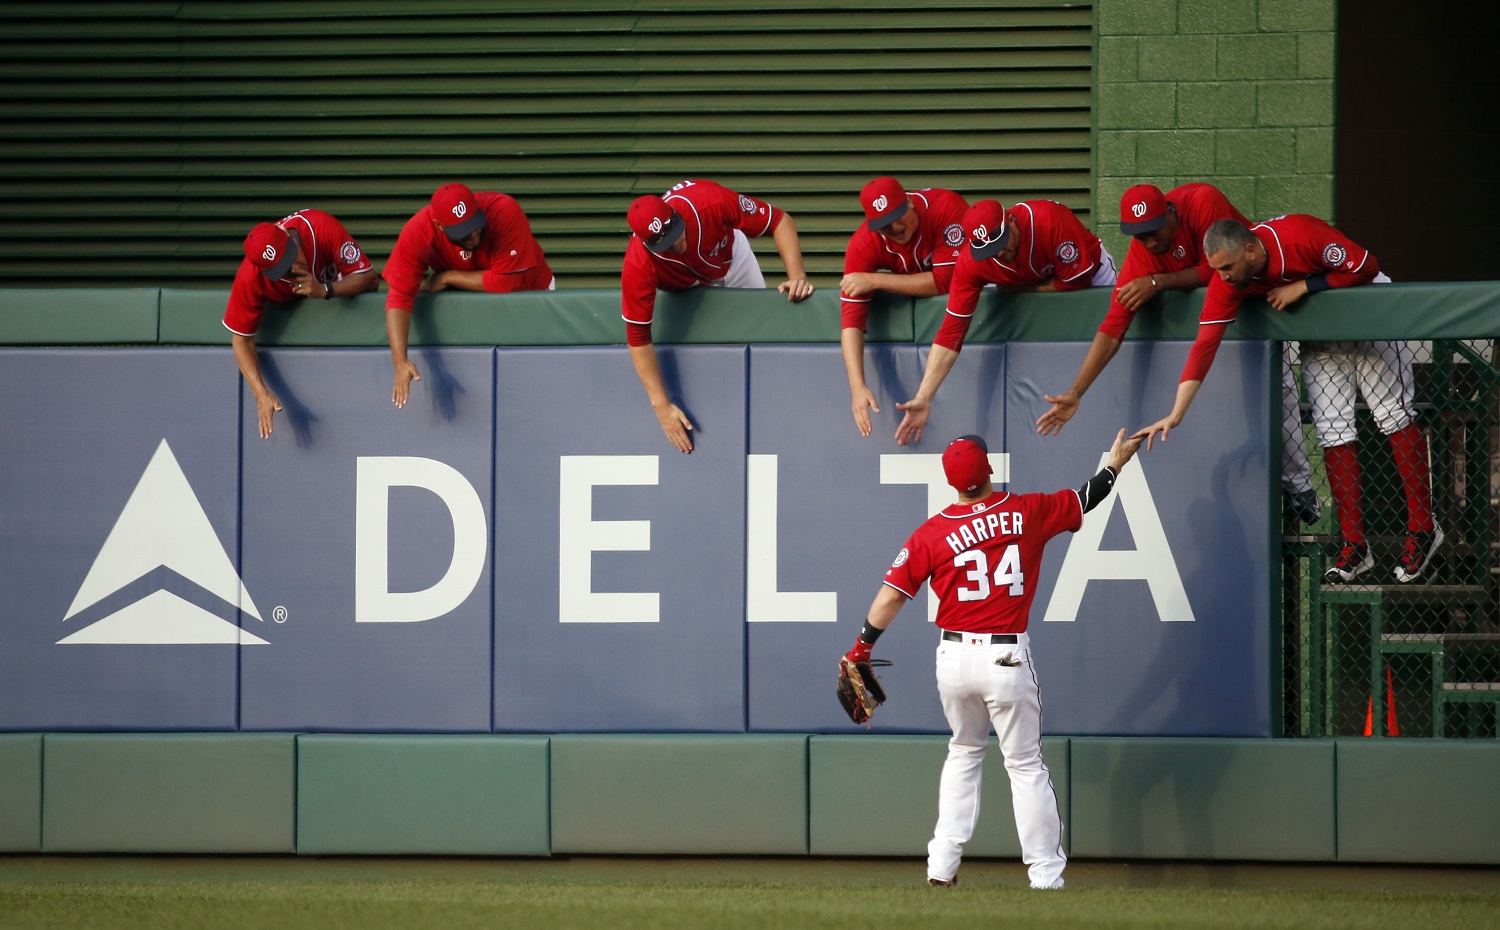 Washington Nationals right fielder Bryce Harper (34) greets his teammates in the bullpen as he heads to right field for the first inning of a baseball game against the St. Louis Cardinals at Nationals Park, Saturday, May 28, 2016, in Washington. (AP Photo/Alex Brandon)